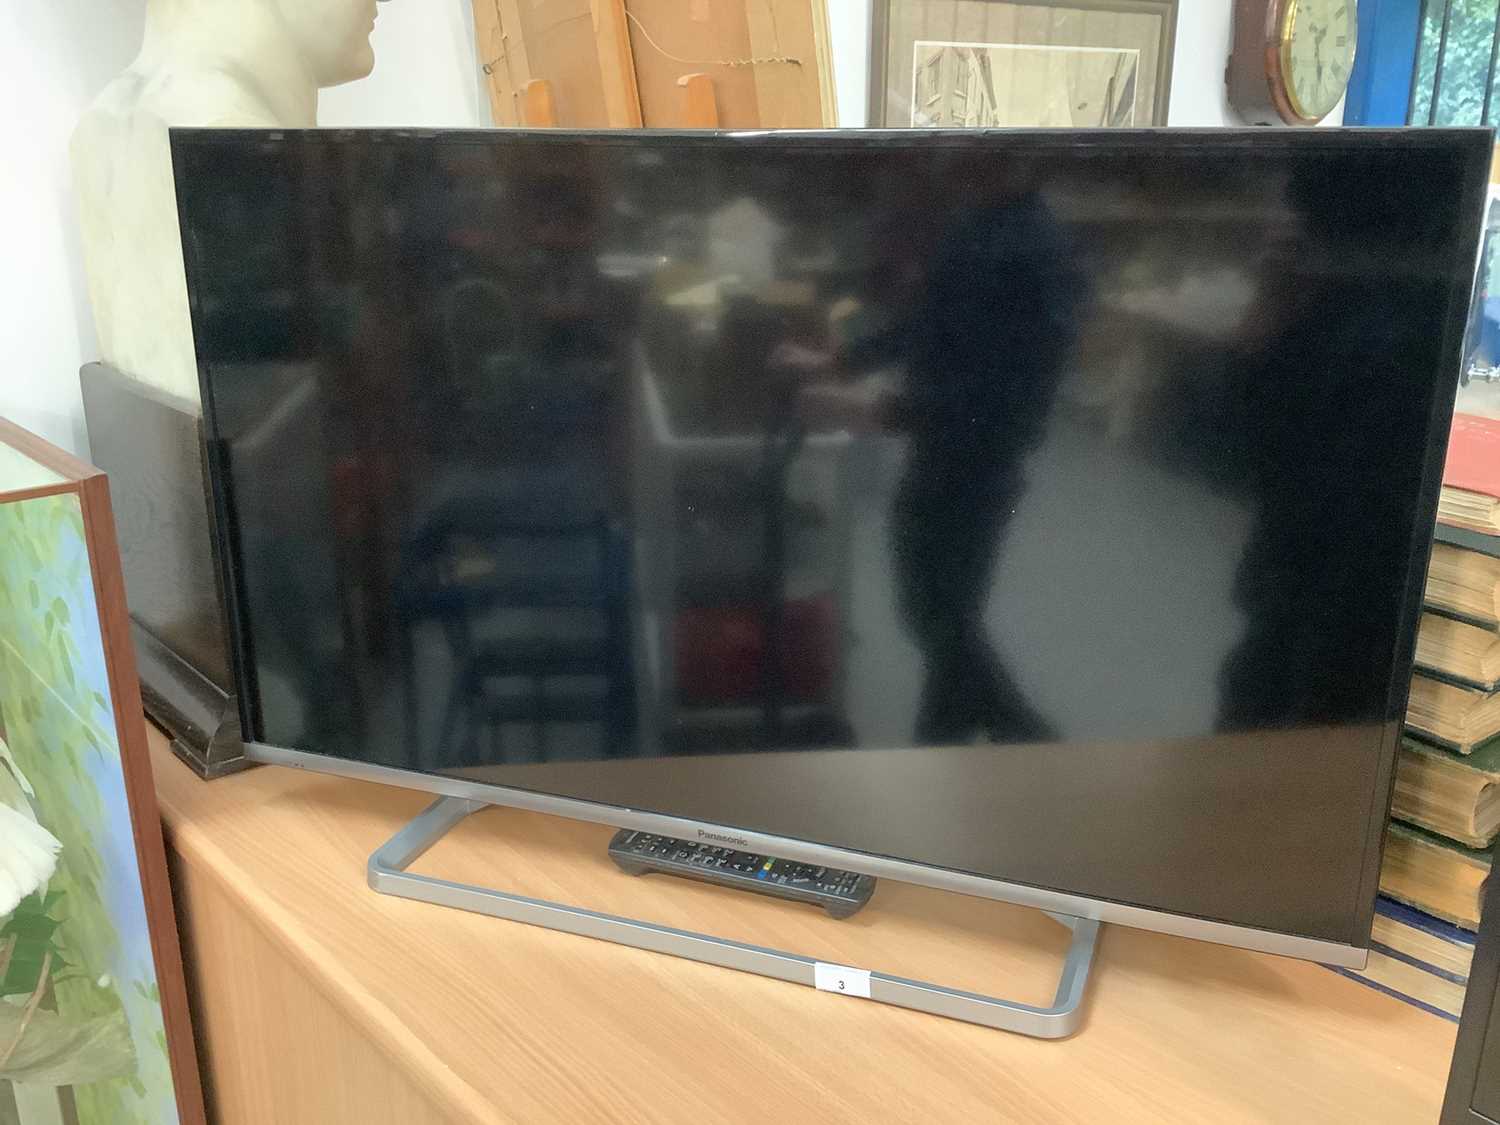 Lot 3 - 39” Panasonic LCD TV , model number TX-39AS600B with remote control